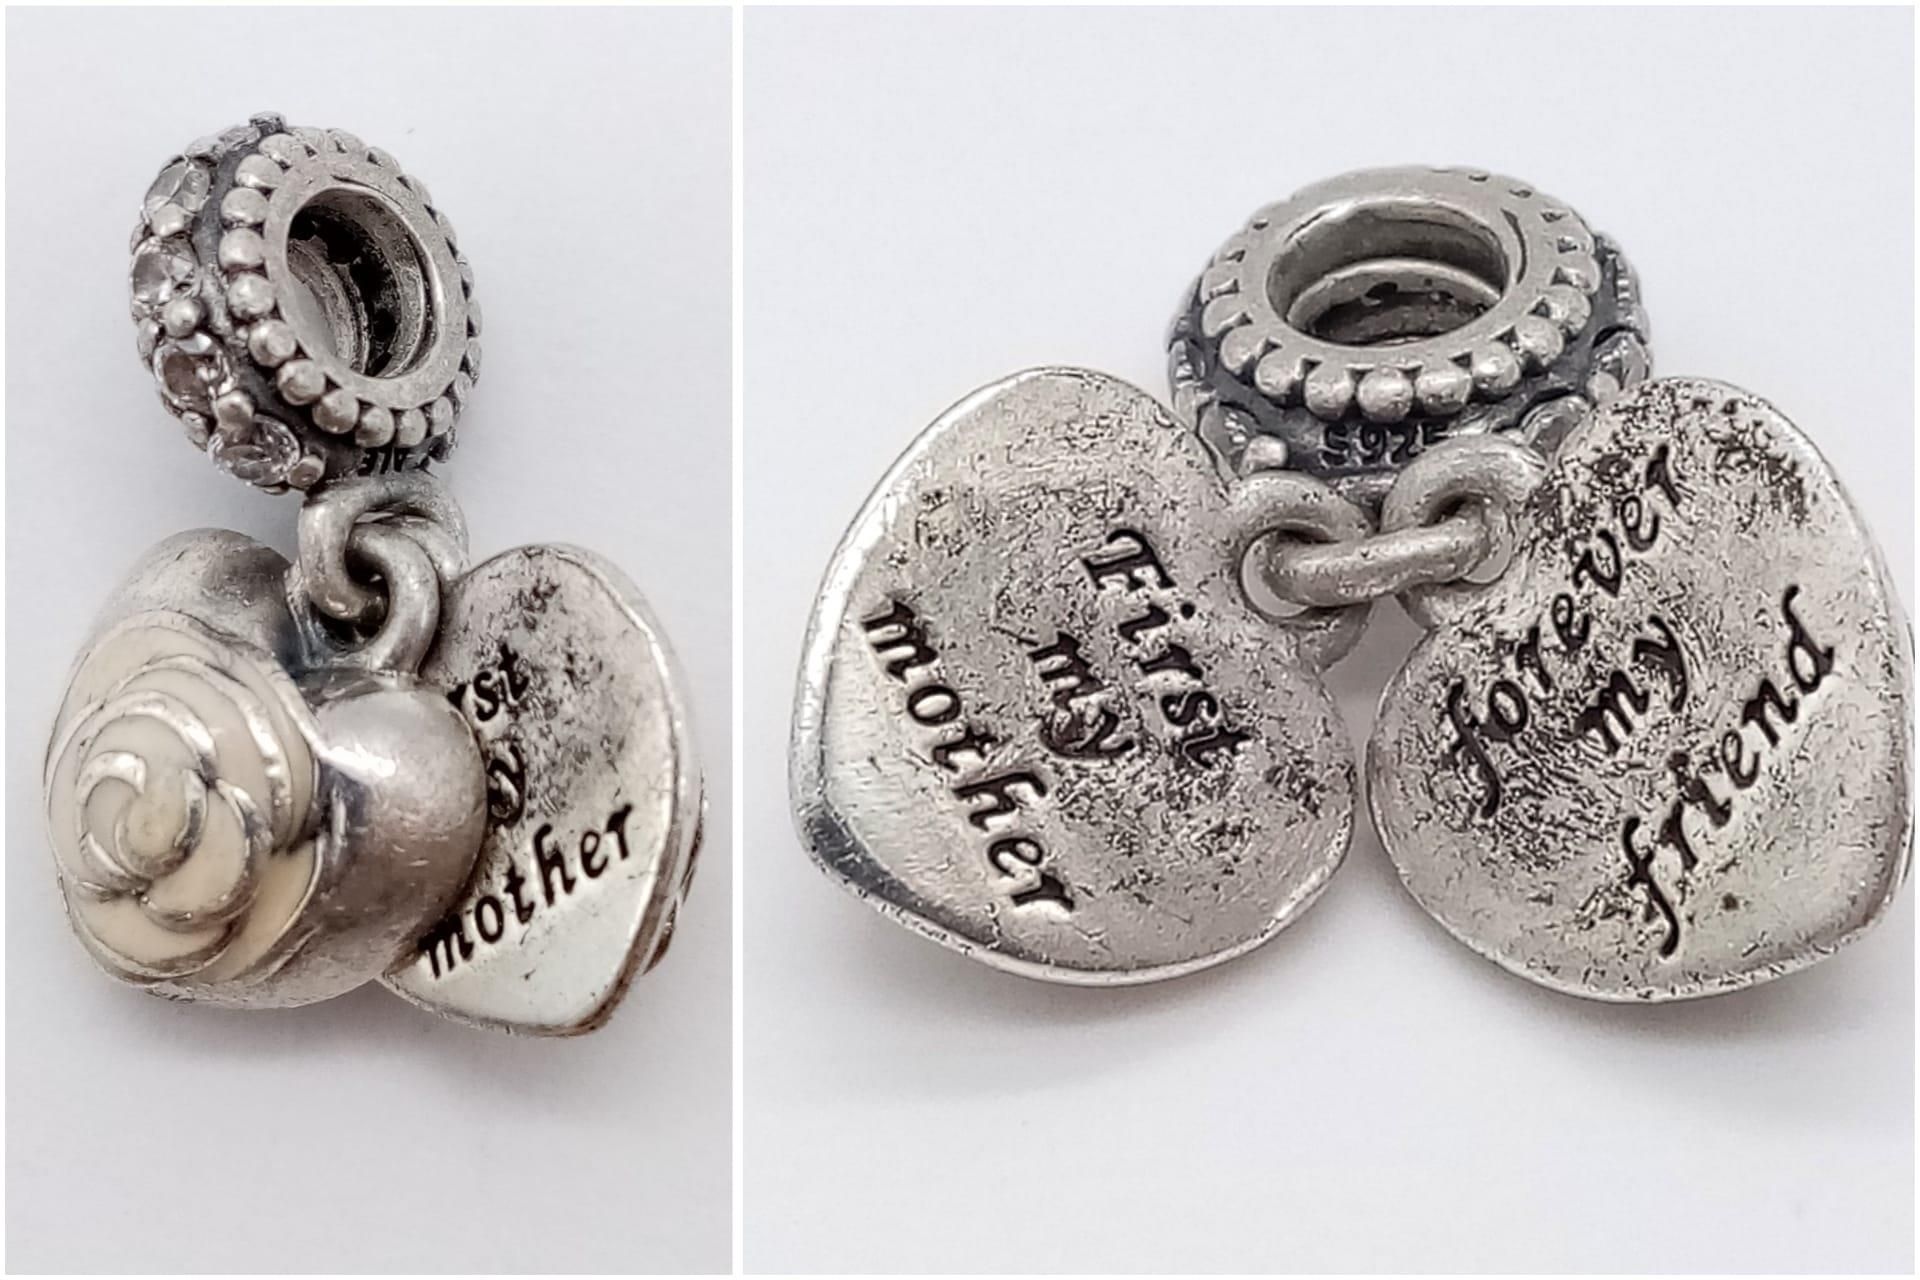 2 x Pandora Sterling Silver Heart Charms - one says 'Family' and the other says 'First My Mother, - Image 4 of 7